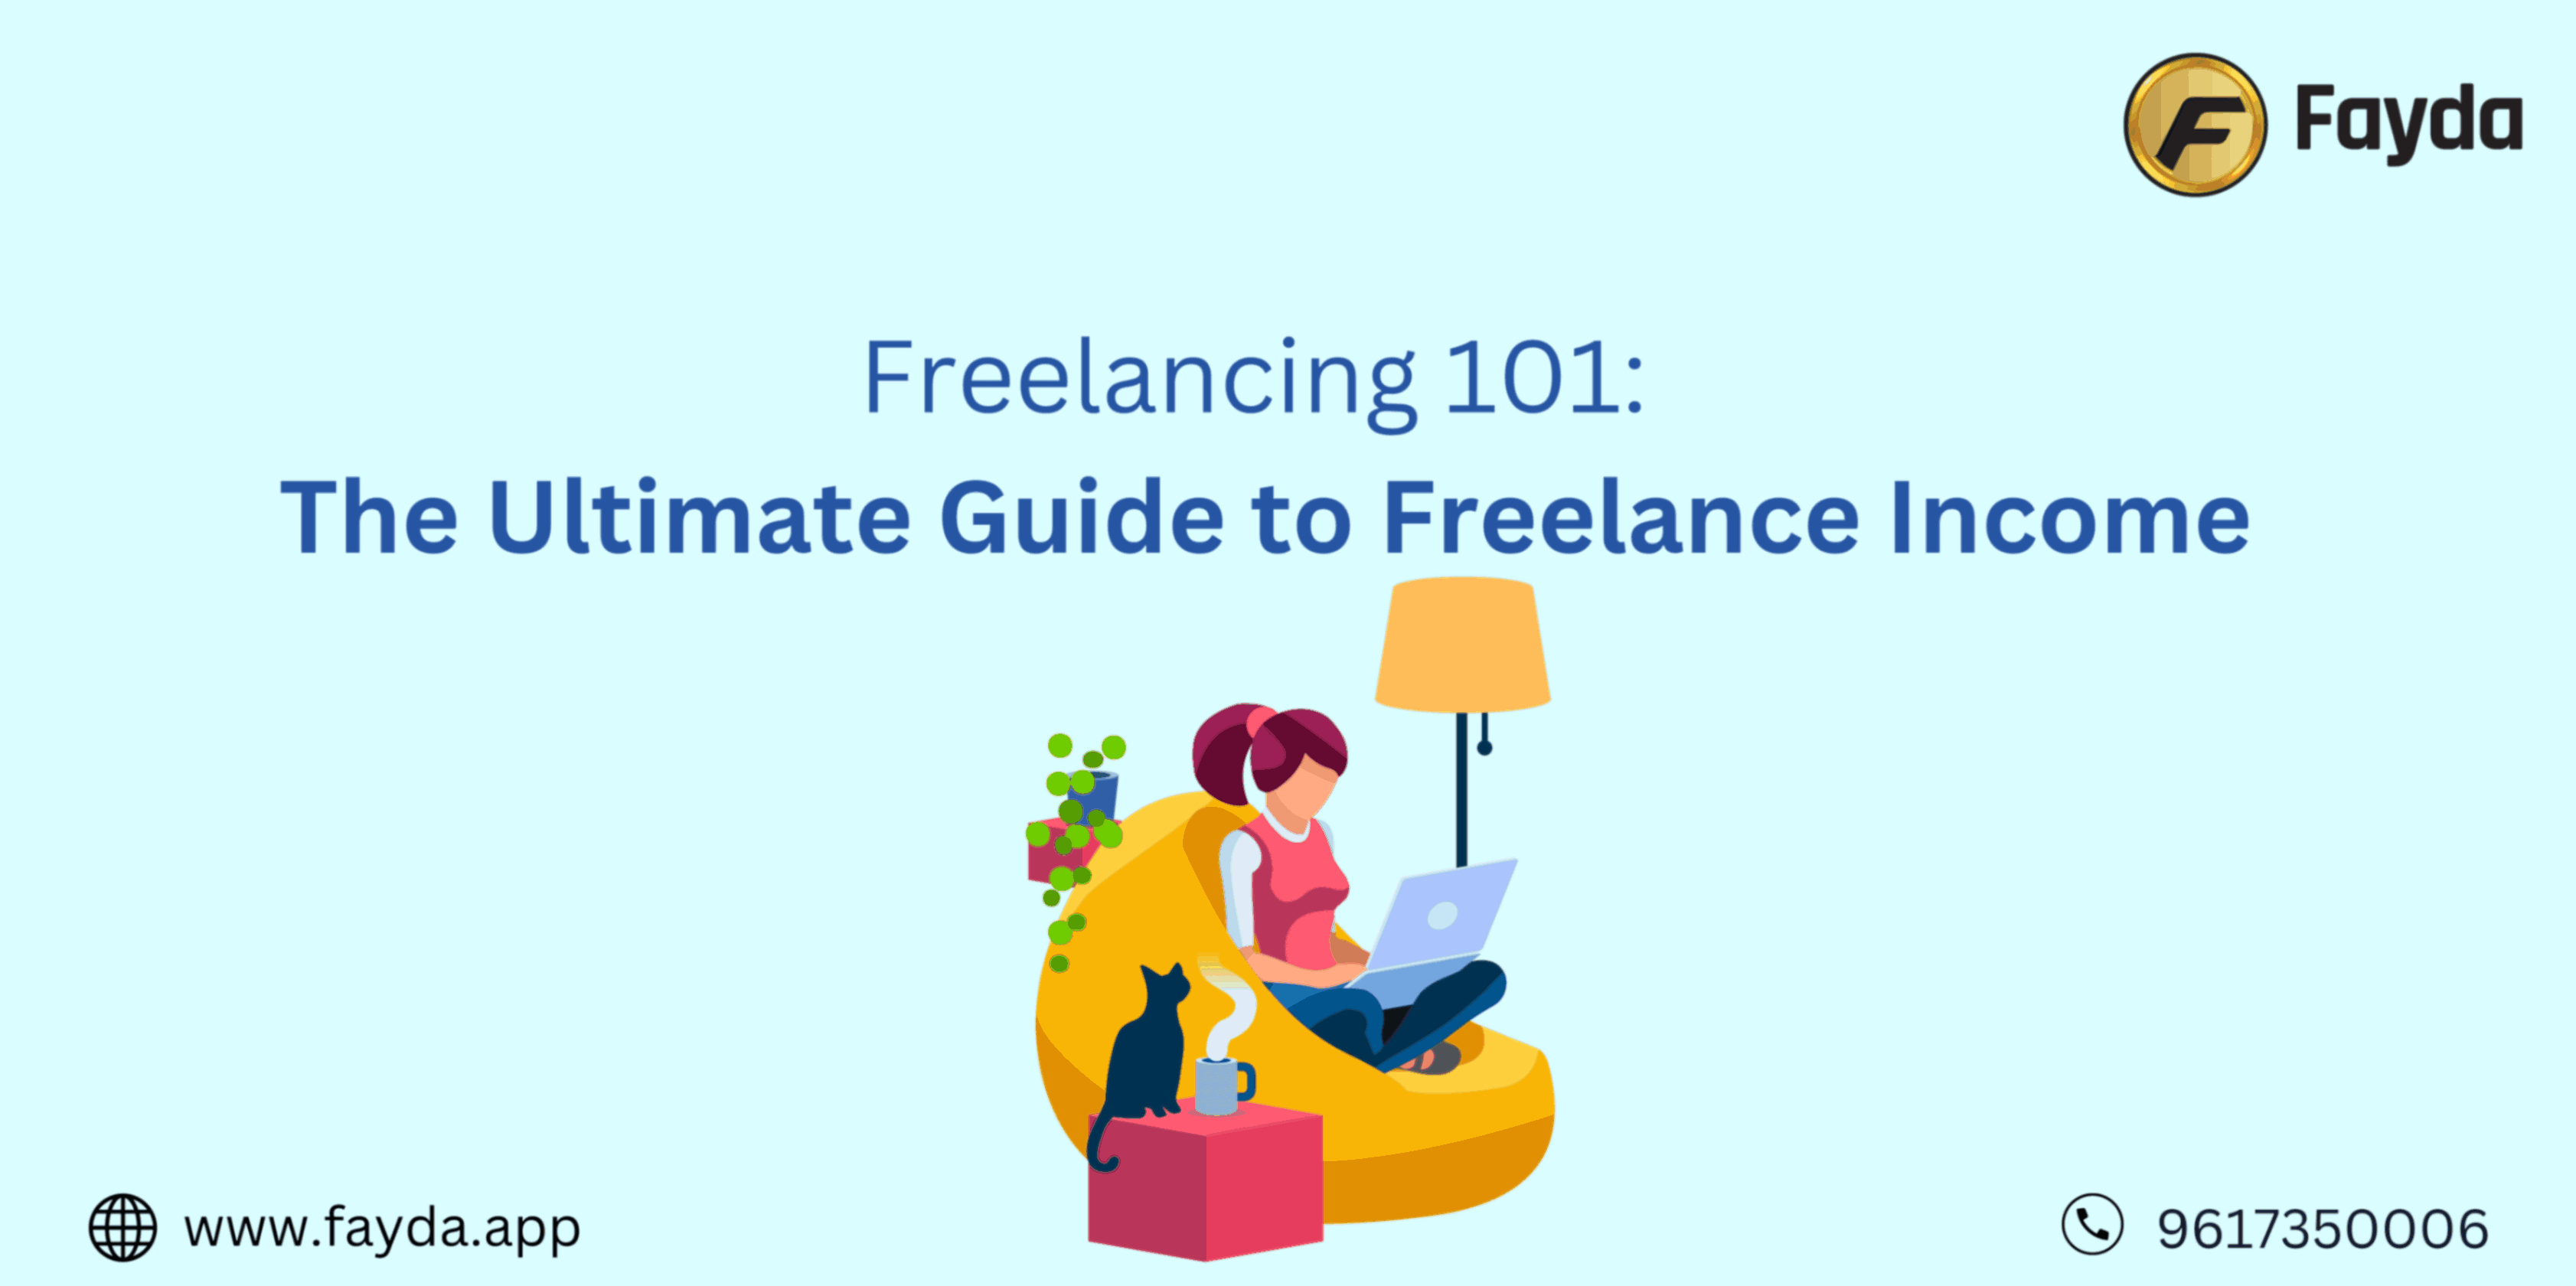 Freelancing 101: The Ultimate Guide to Freelance Income